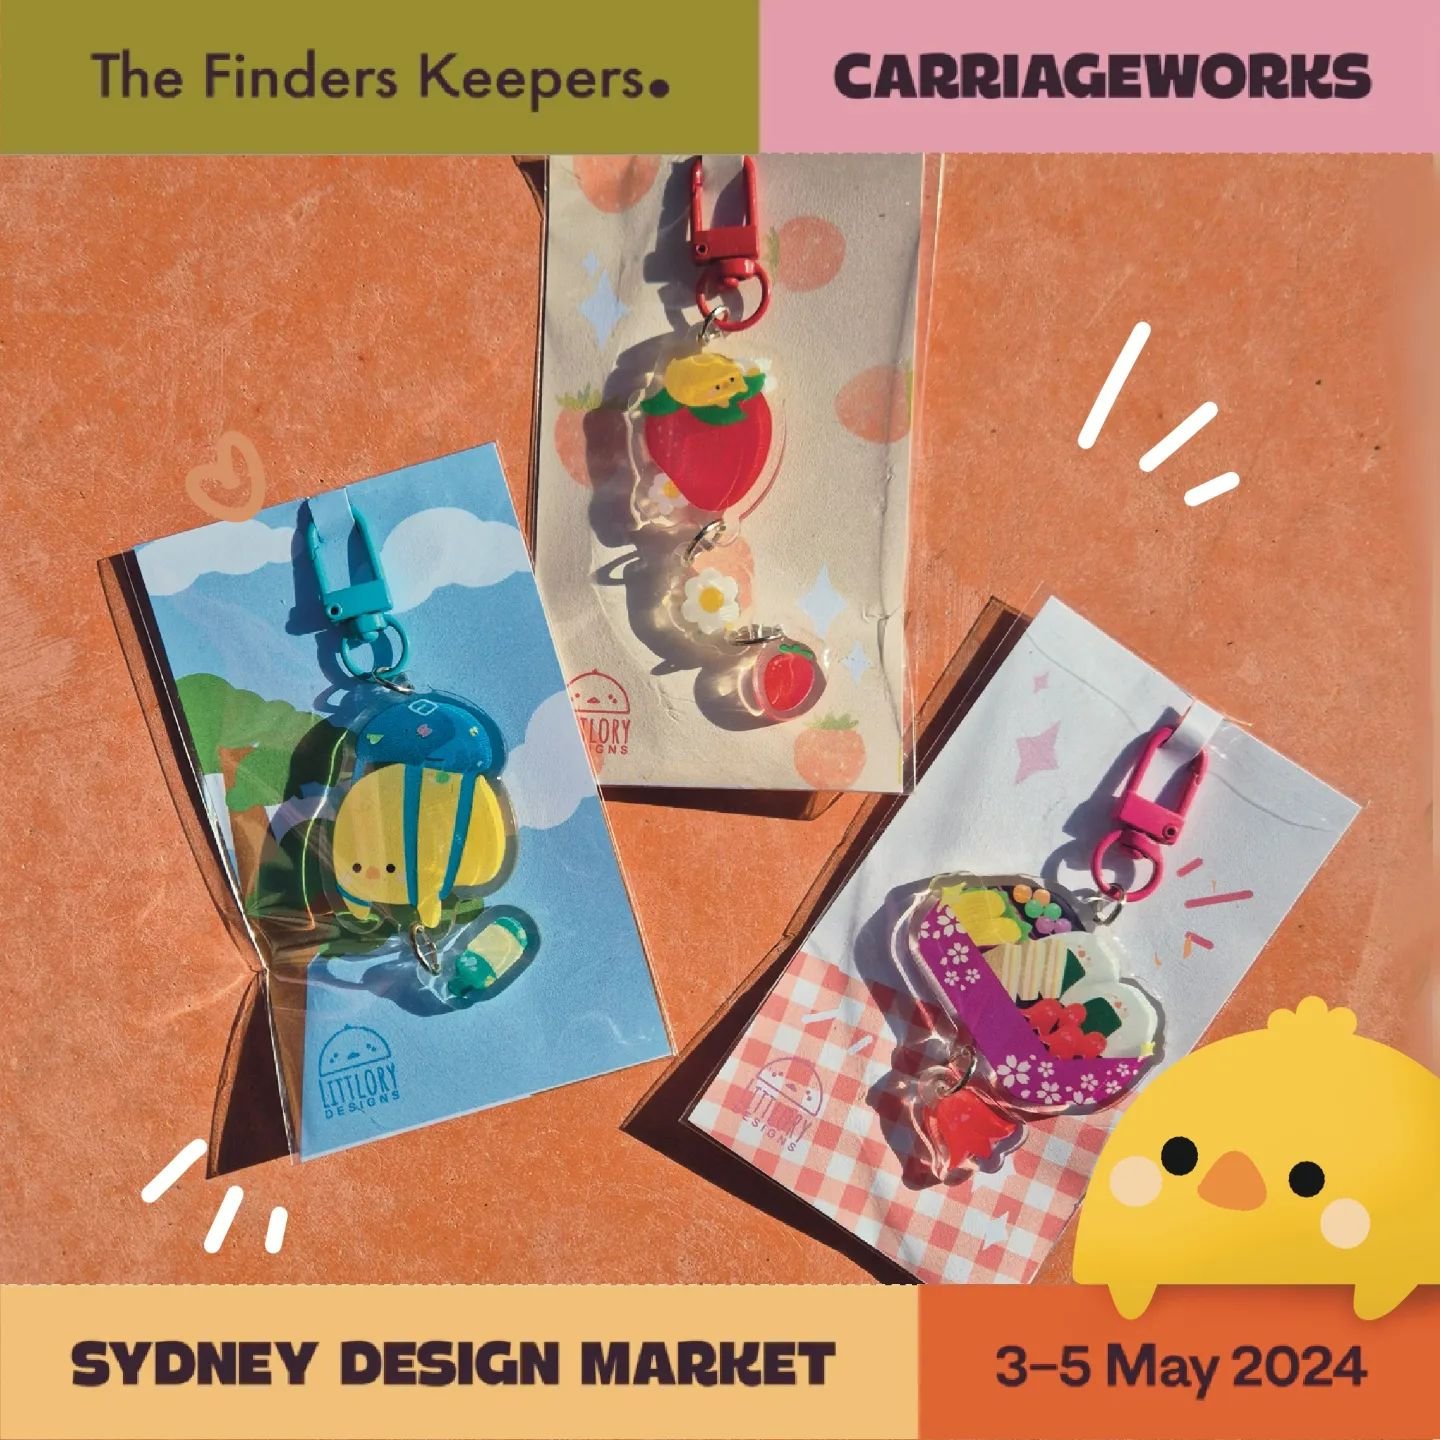 SUPER EXCITED!!! 😳Two weeks until I&rsquo;ll be taking part in The @finders_keepers Design Market, hosted at Carriageworks! Swipe to get a peek at some of the cuties I'm bringing. 

The Finders Keepers Design Market 
📅 3-5 May 2024
❣️ Carriageworks